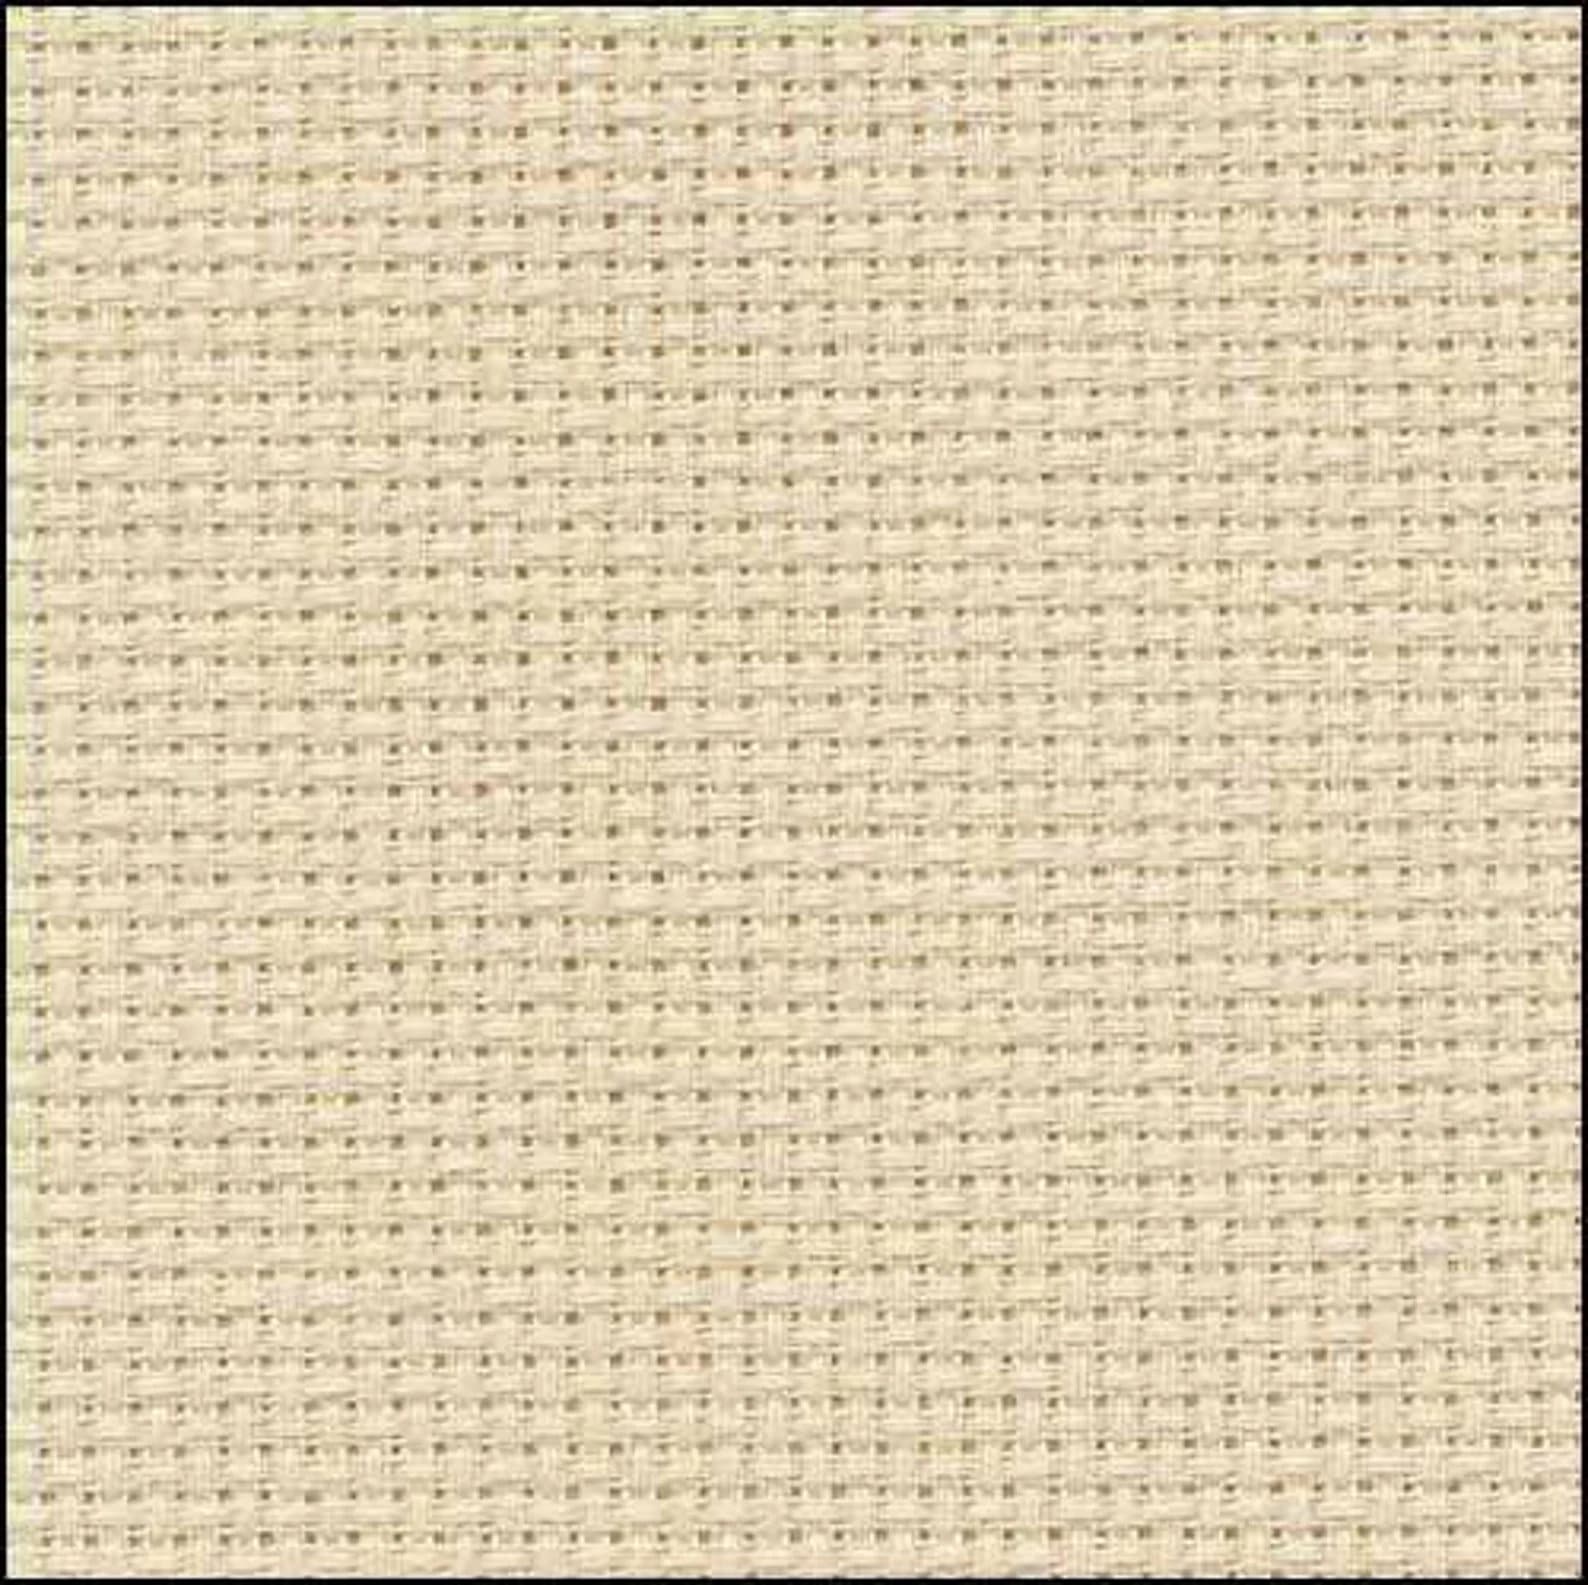 16 Count Parchment (Sand) Aida – Zweigart Cross Stitch Fabric – More I –  Heartland Quilting and Stitching